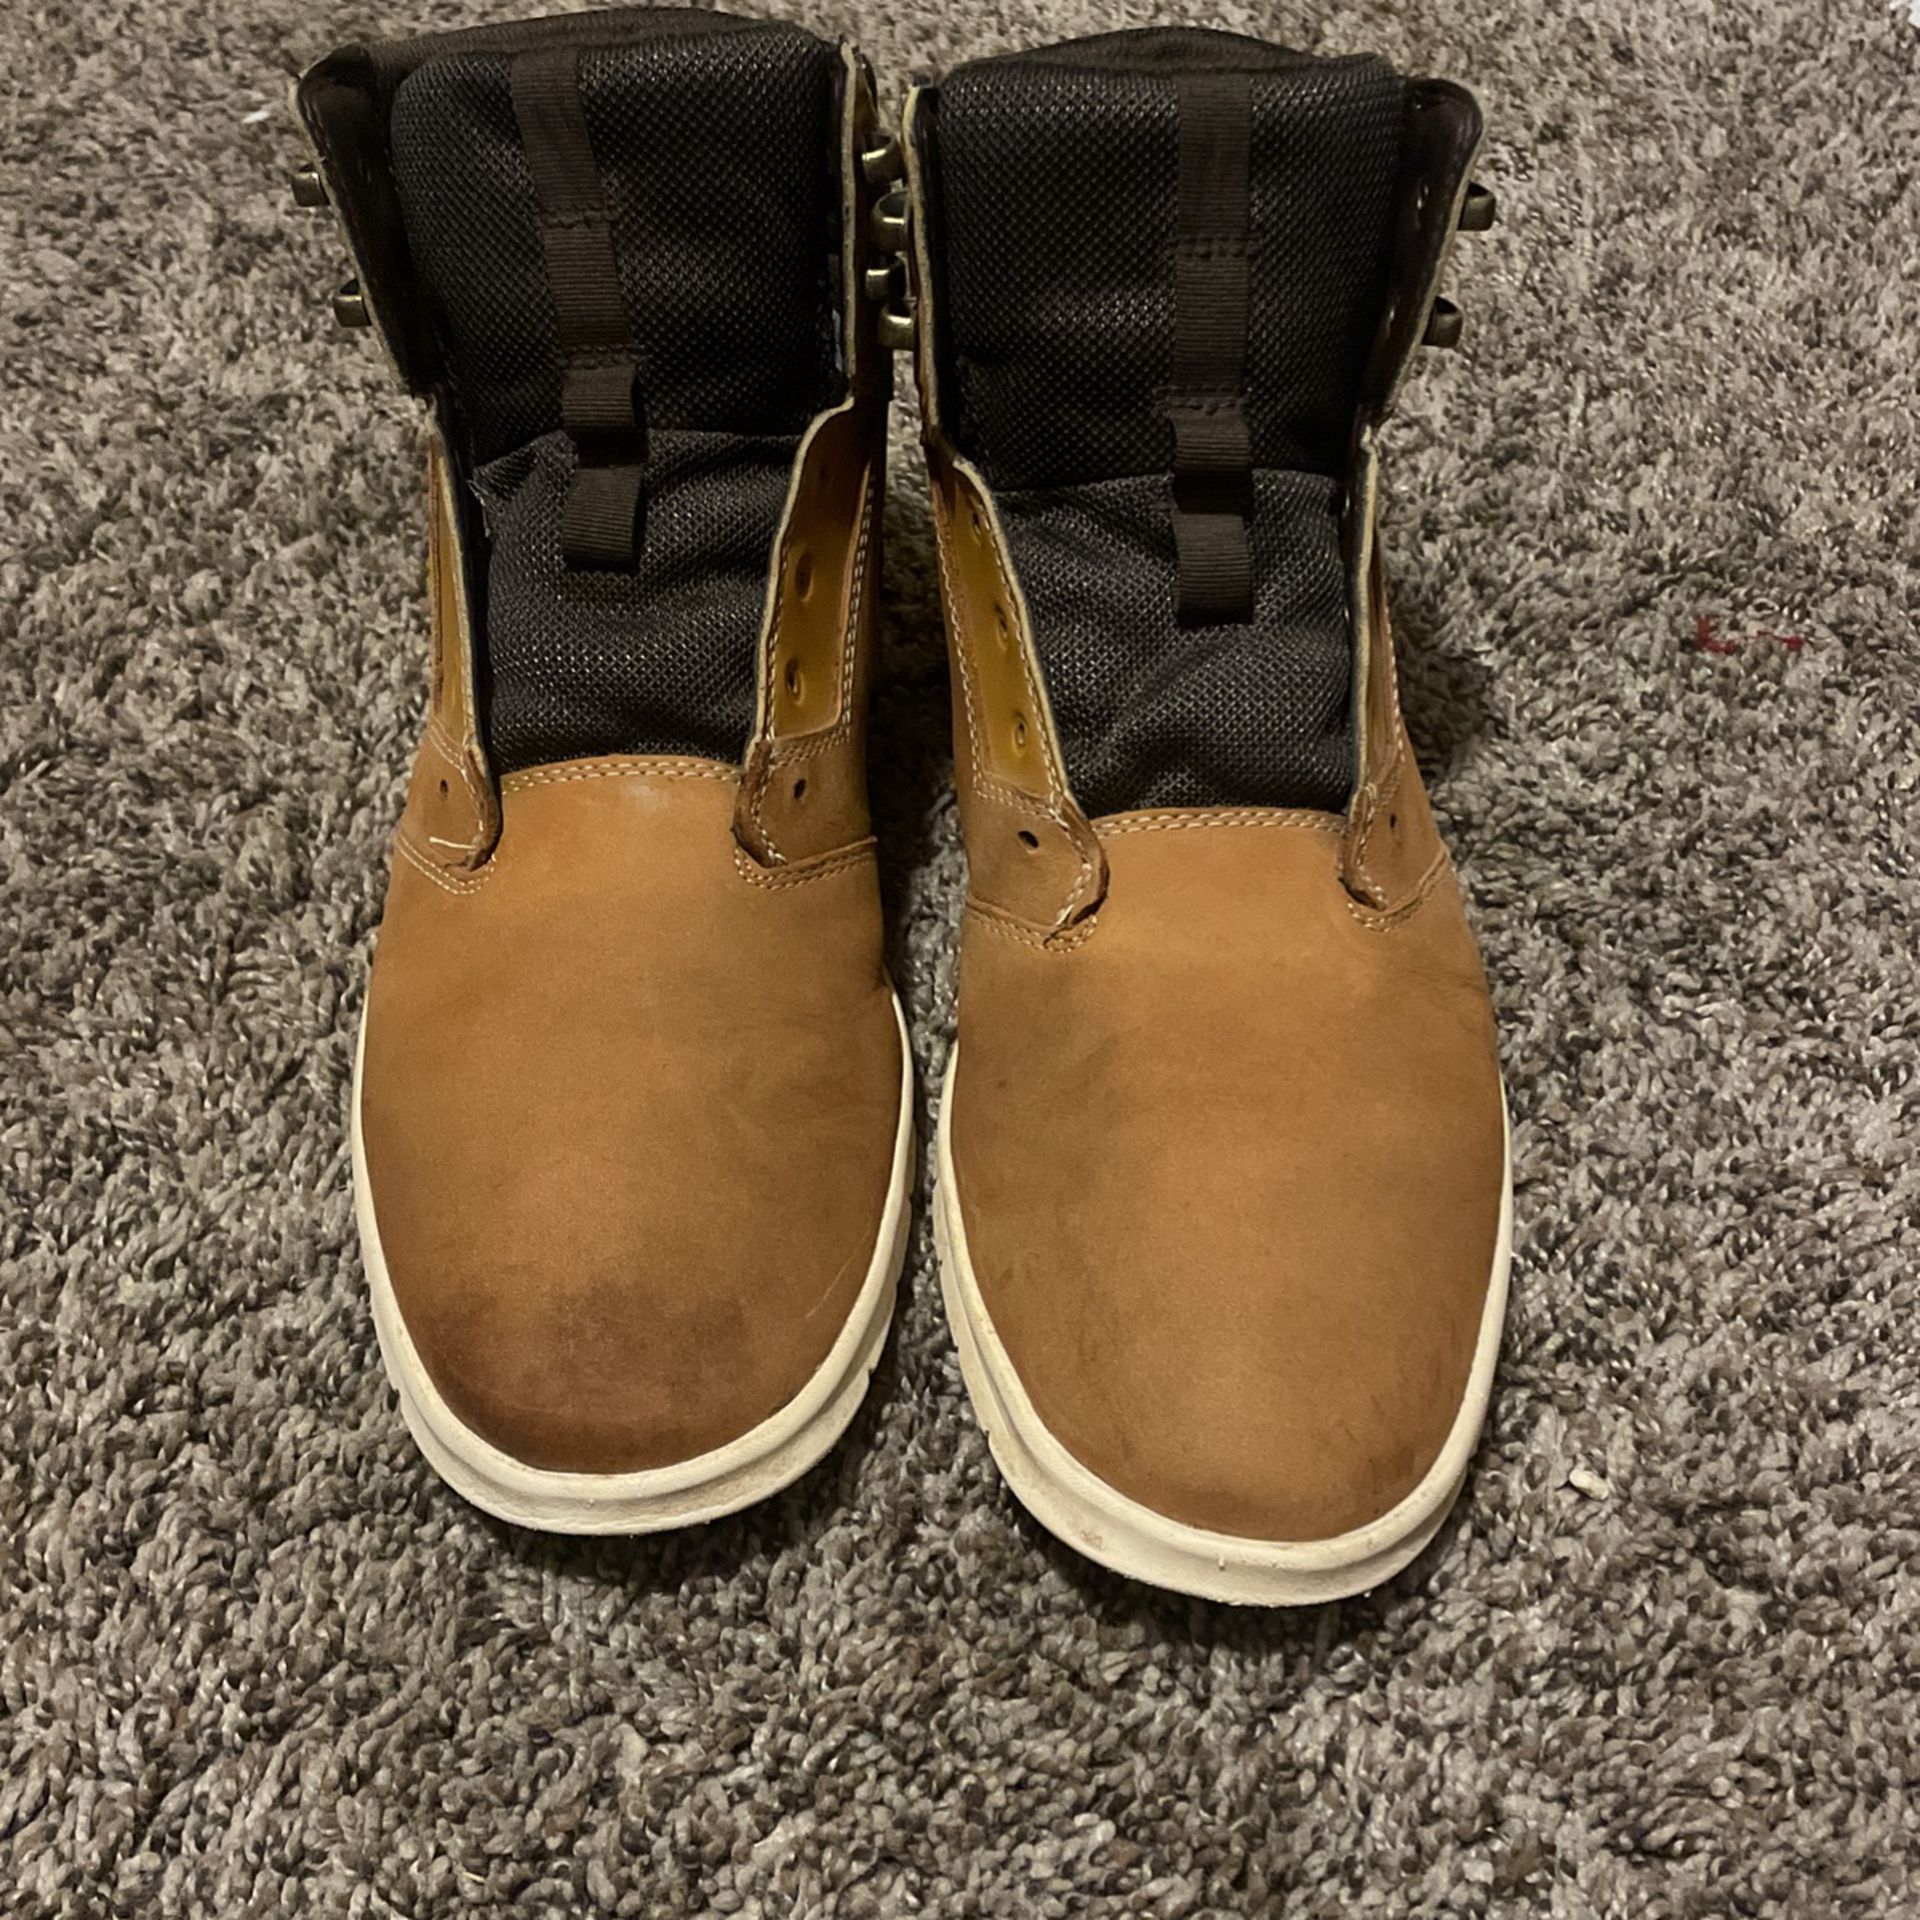 Size 9 Men’s Timberland Boots